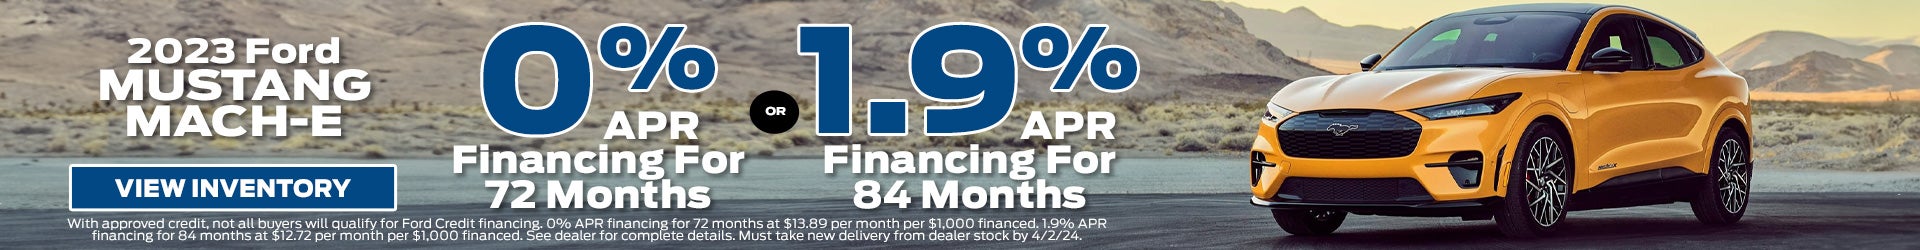 0% FINANCING FOR 72 MONTHS OR 1.9% FOR 82 MONTHS